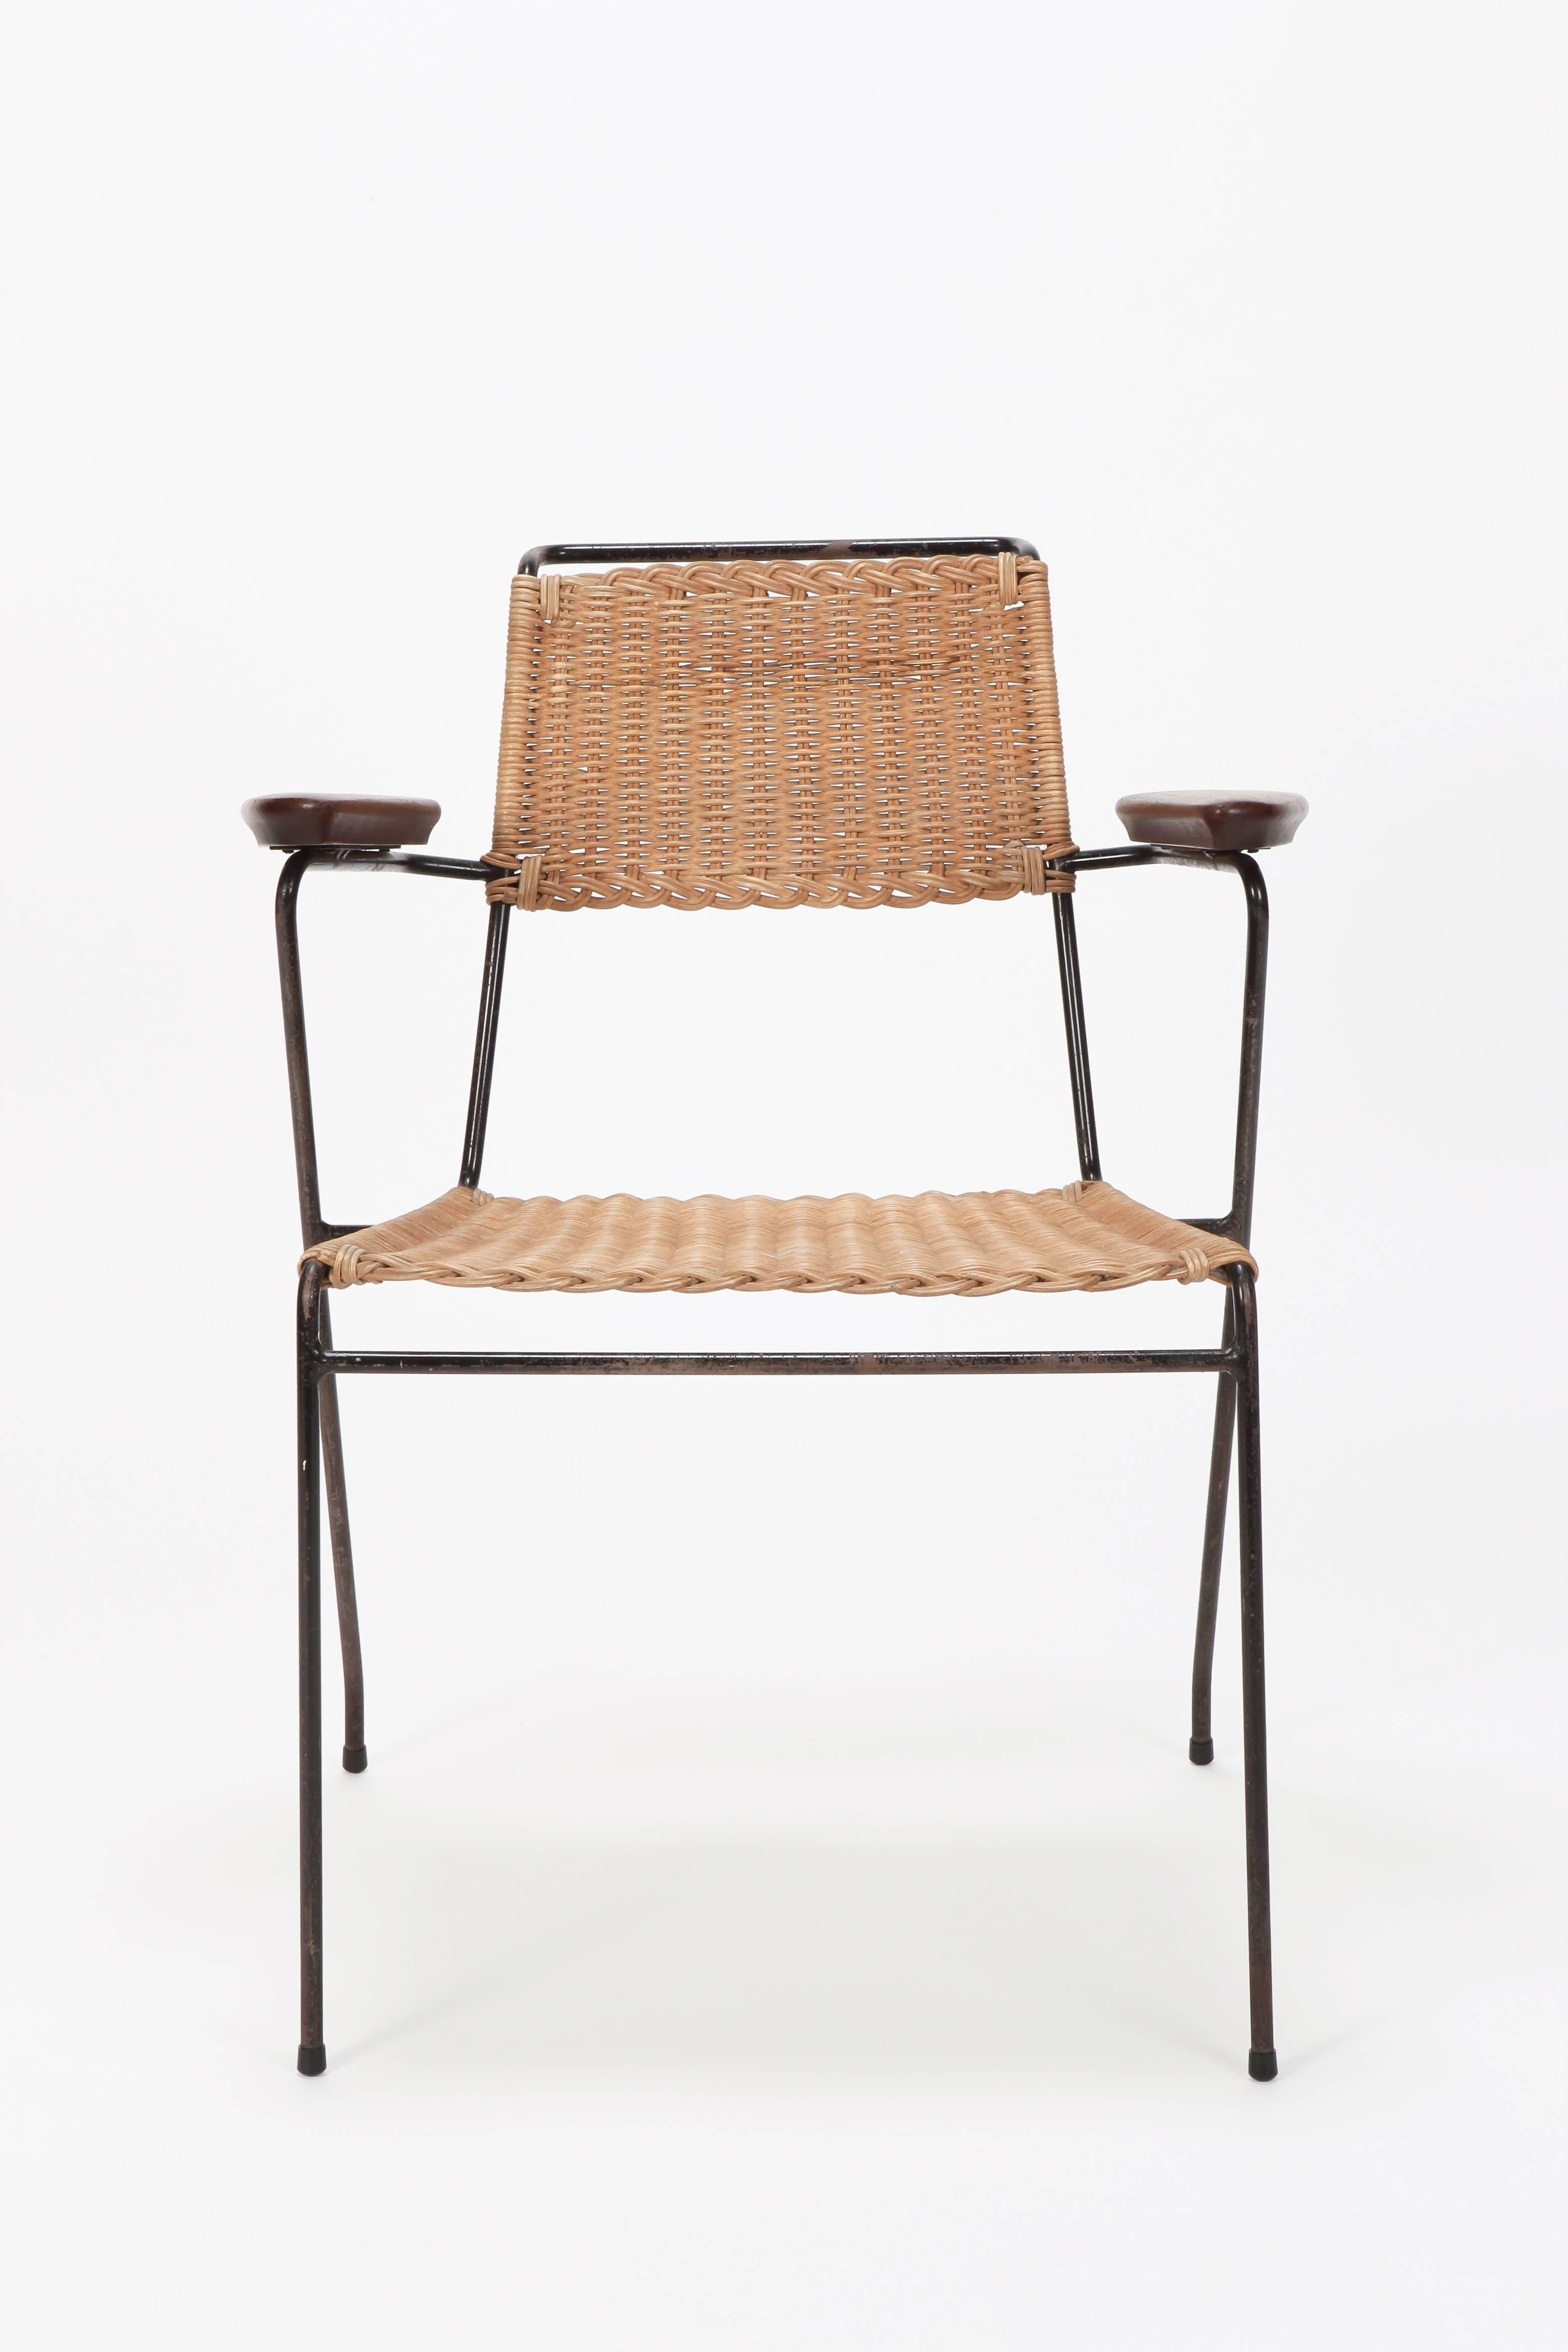 Paul Schneider von Esleben rattan chair manufactured by Wilde & Spieth in the 1950s. Solid teak armrests. The rattan is in very good condition and was recently restored. The black metal frame was just oiled and left with its beautiful original